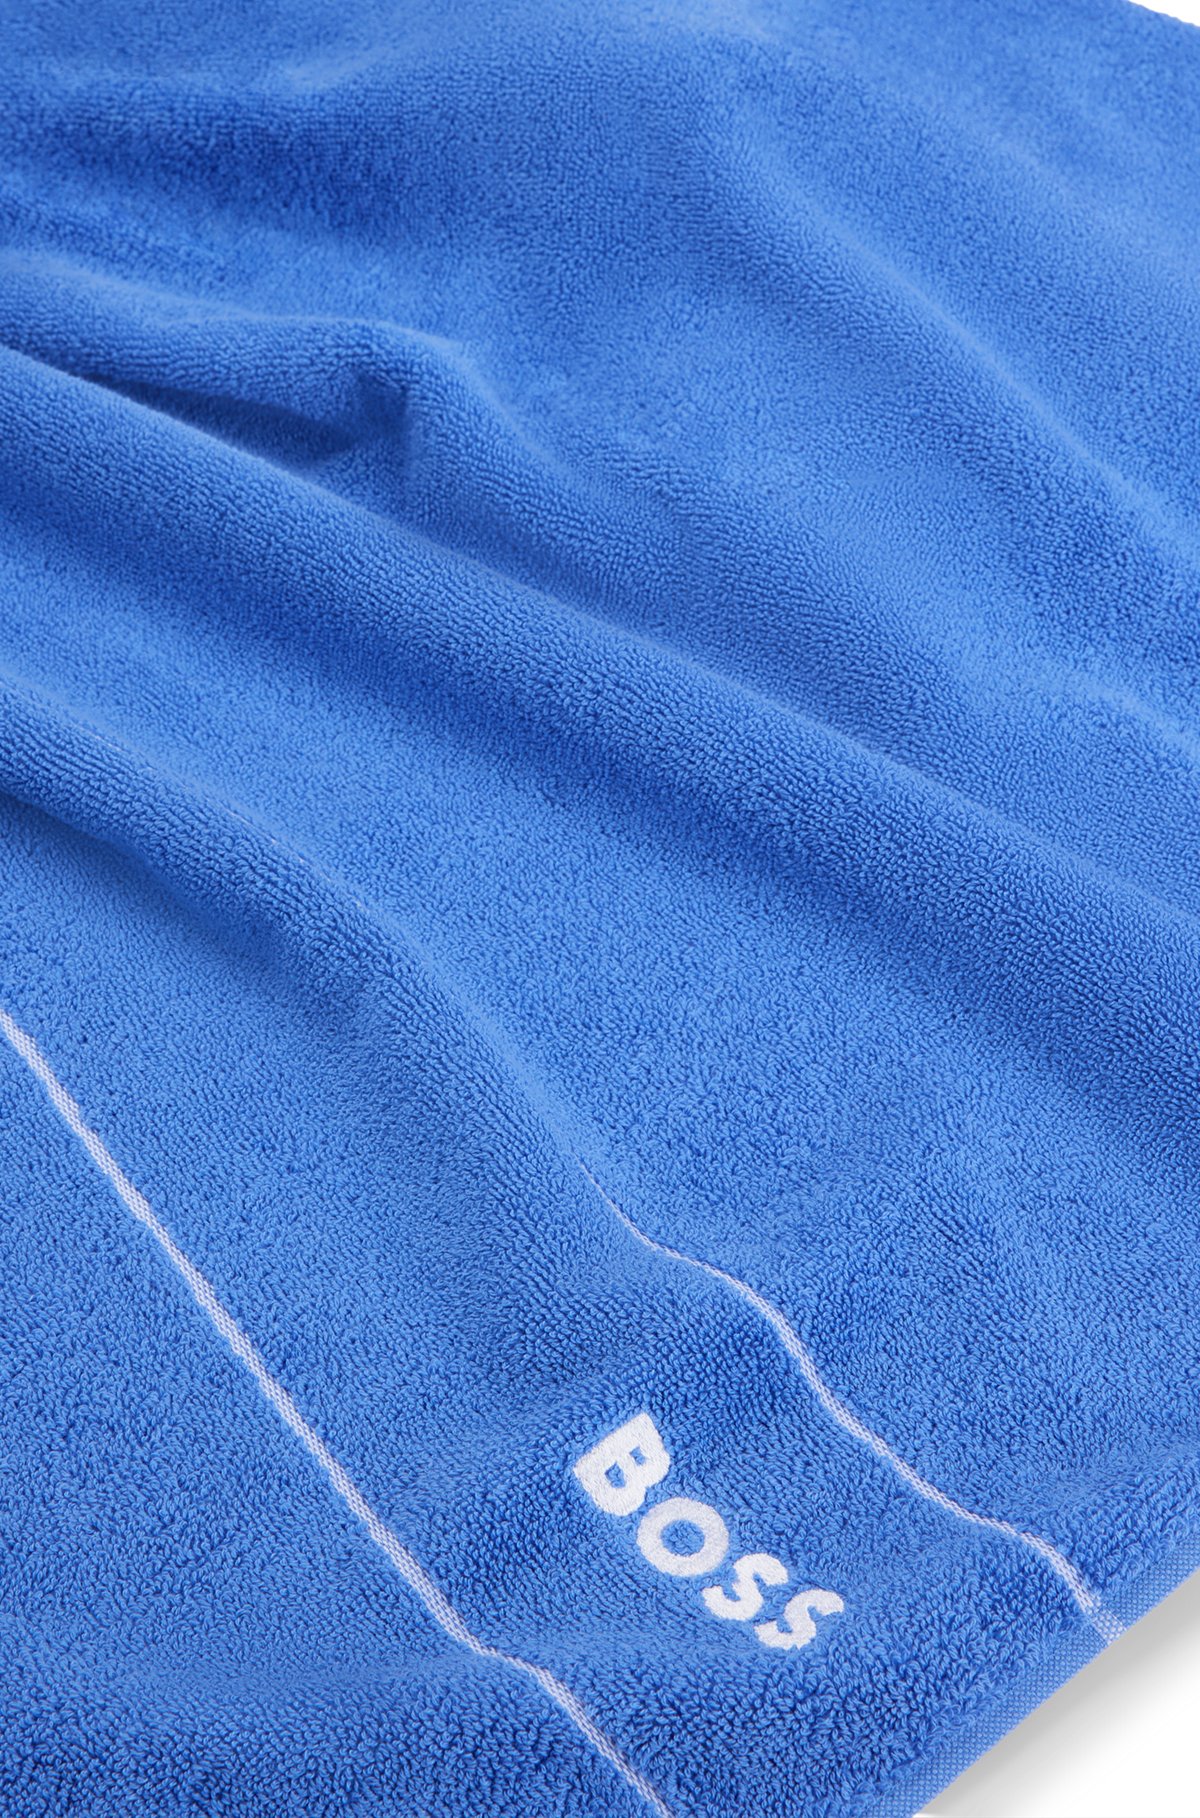 Cotton bath towel with white logo embroidery, Blue